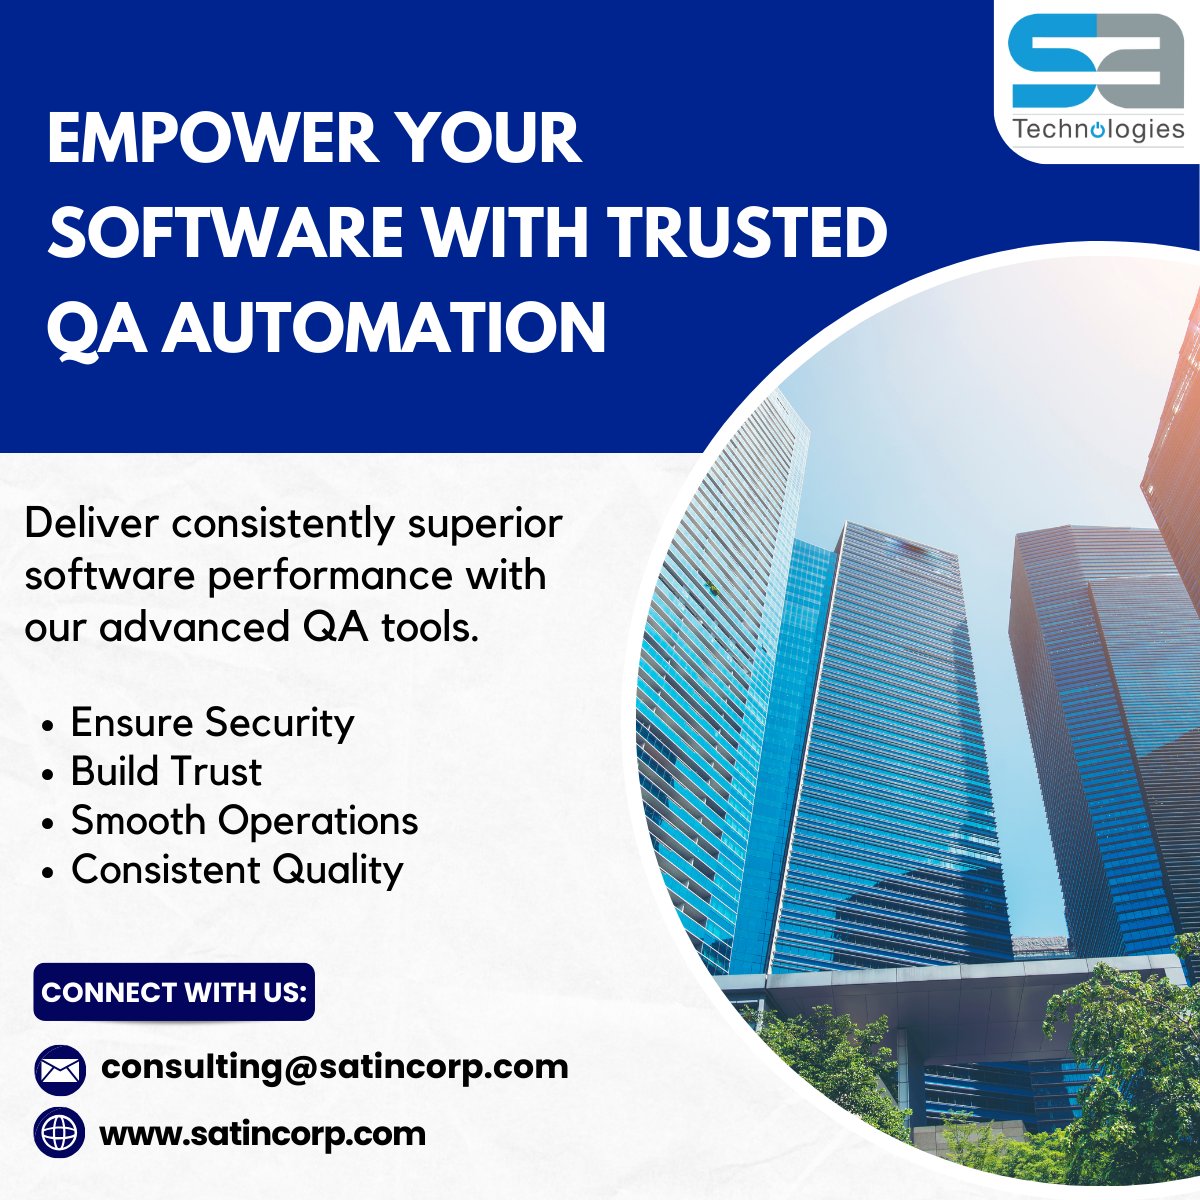 Empower Your Software with Trusted QA Automation: Ensuring Unparalleled Security, Reliability, and Excellence in Every Test Cycle.

Contact us: consulting@satincorp.com 
visit us: zurl.co/WzBP

#aifuturetesting #qaautomation #softwarereliability #satech #zerobugs